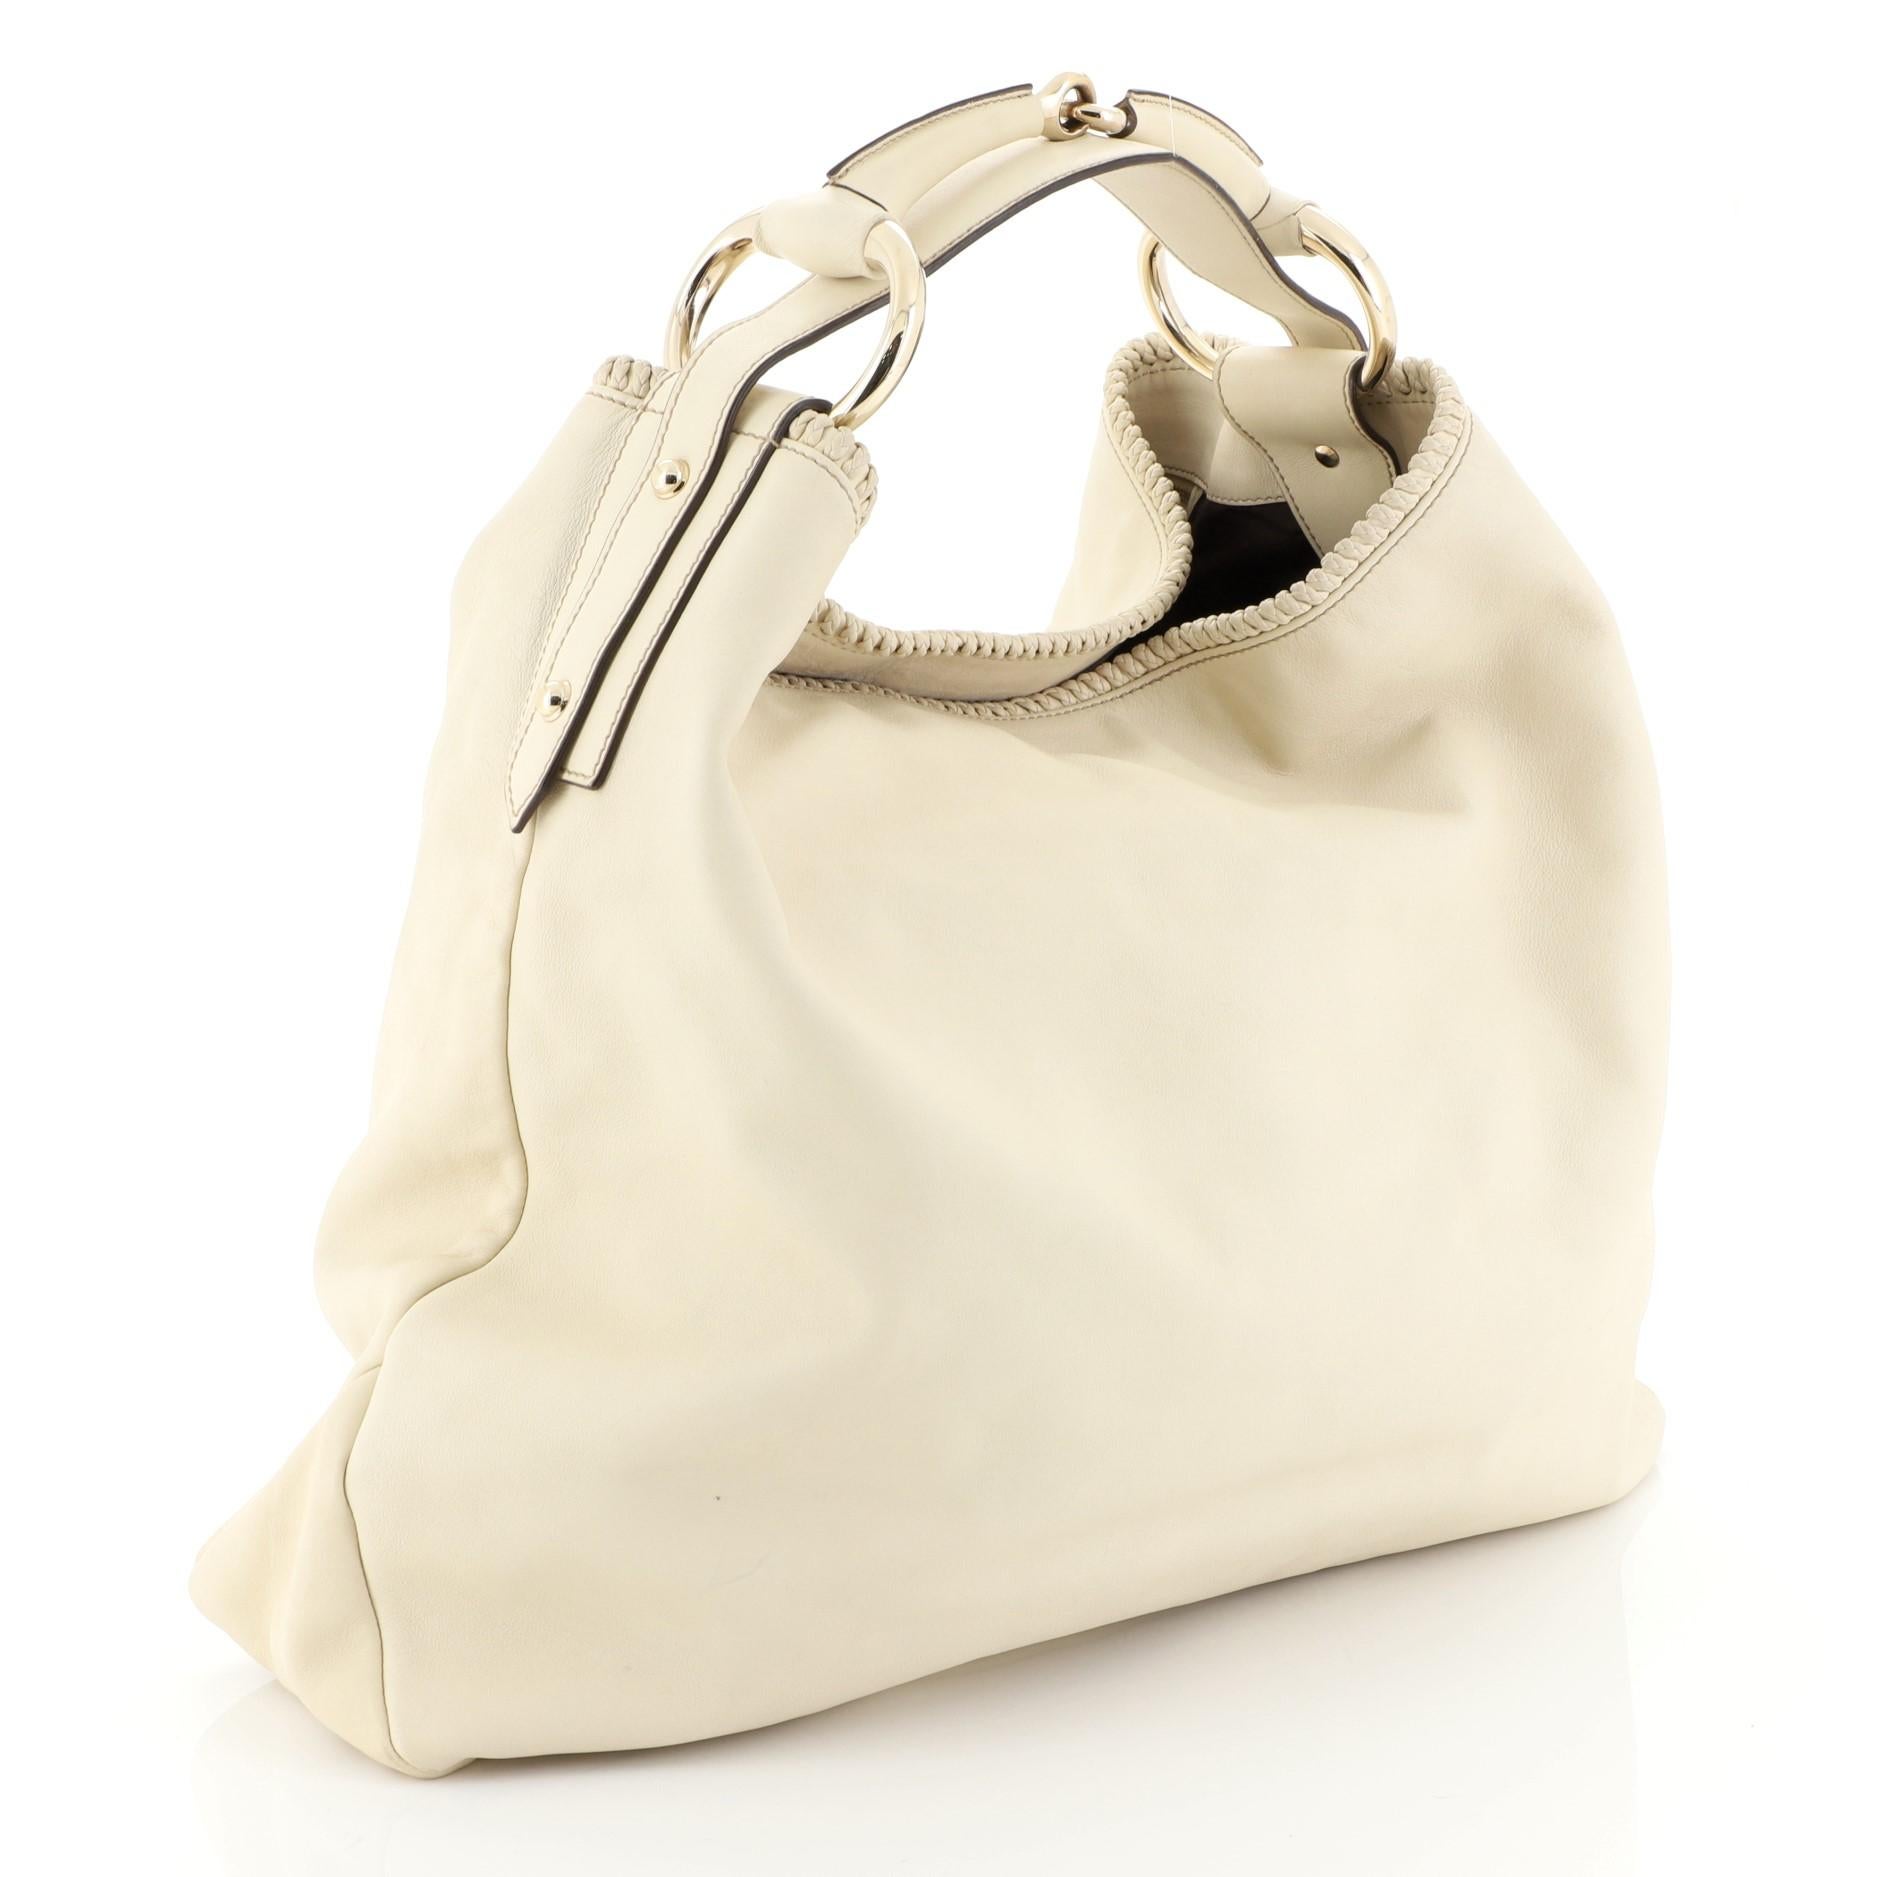 This Gucci Horsebit Hobo Leather Large, crafted from neutral leather, features a single looped handle, gold-tone hardware, and metal horsebit accents. Its wide top opens to a brown fabric interior with zipped pocket. 

Estimated Retail Price: